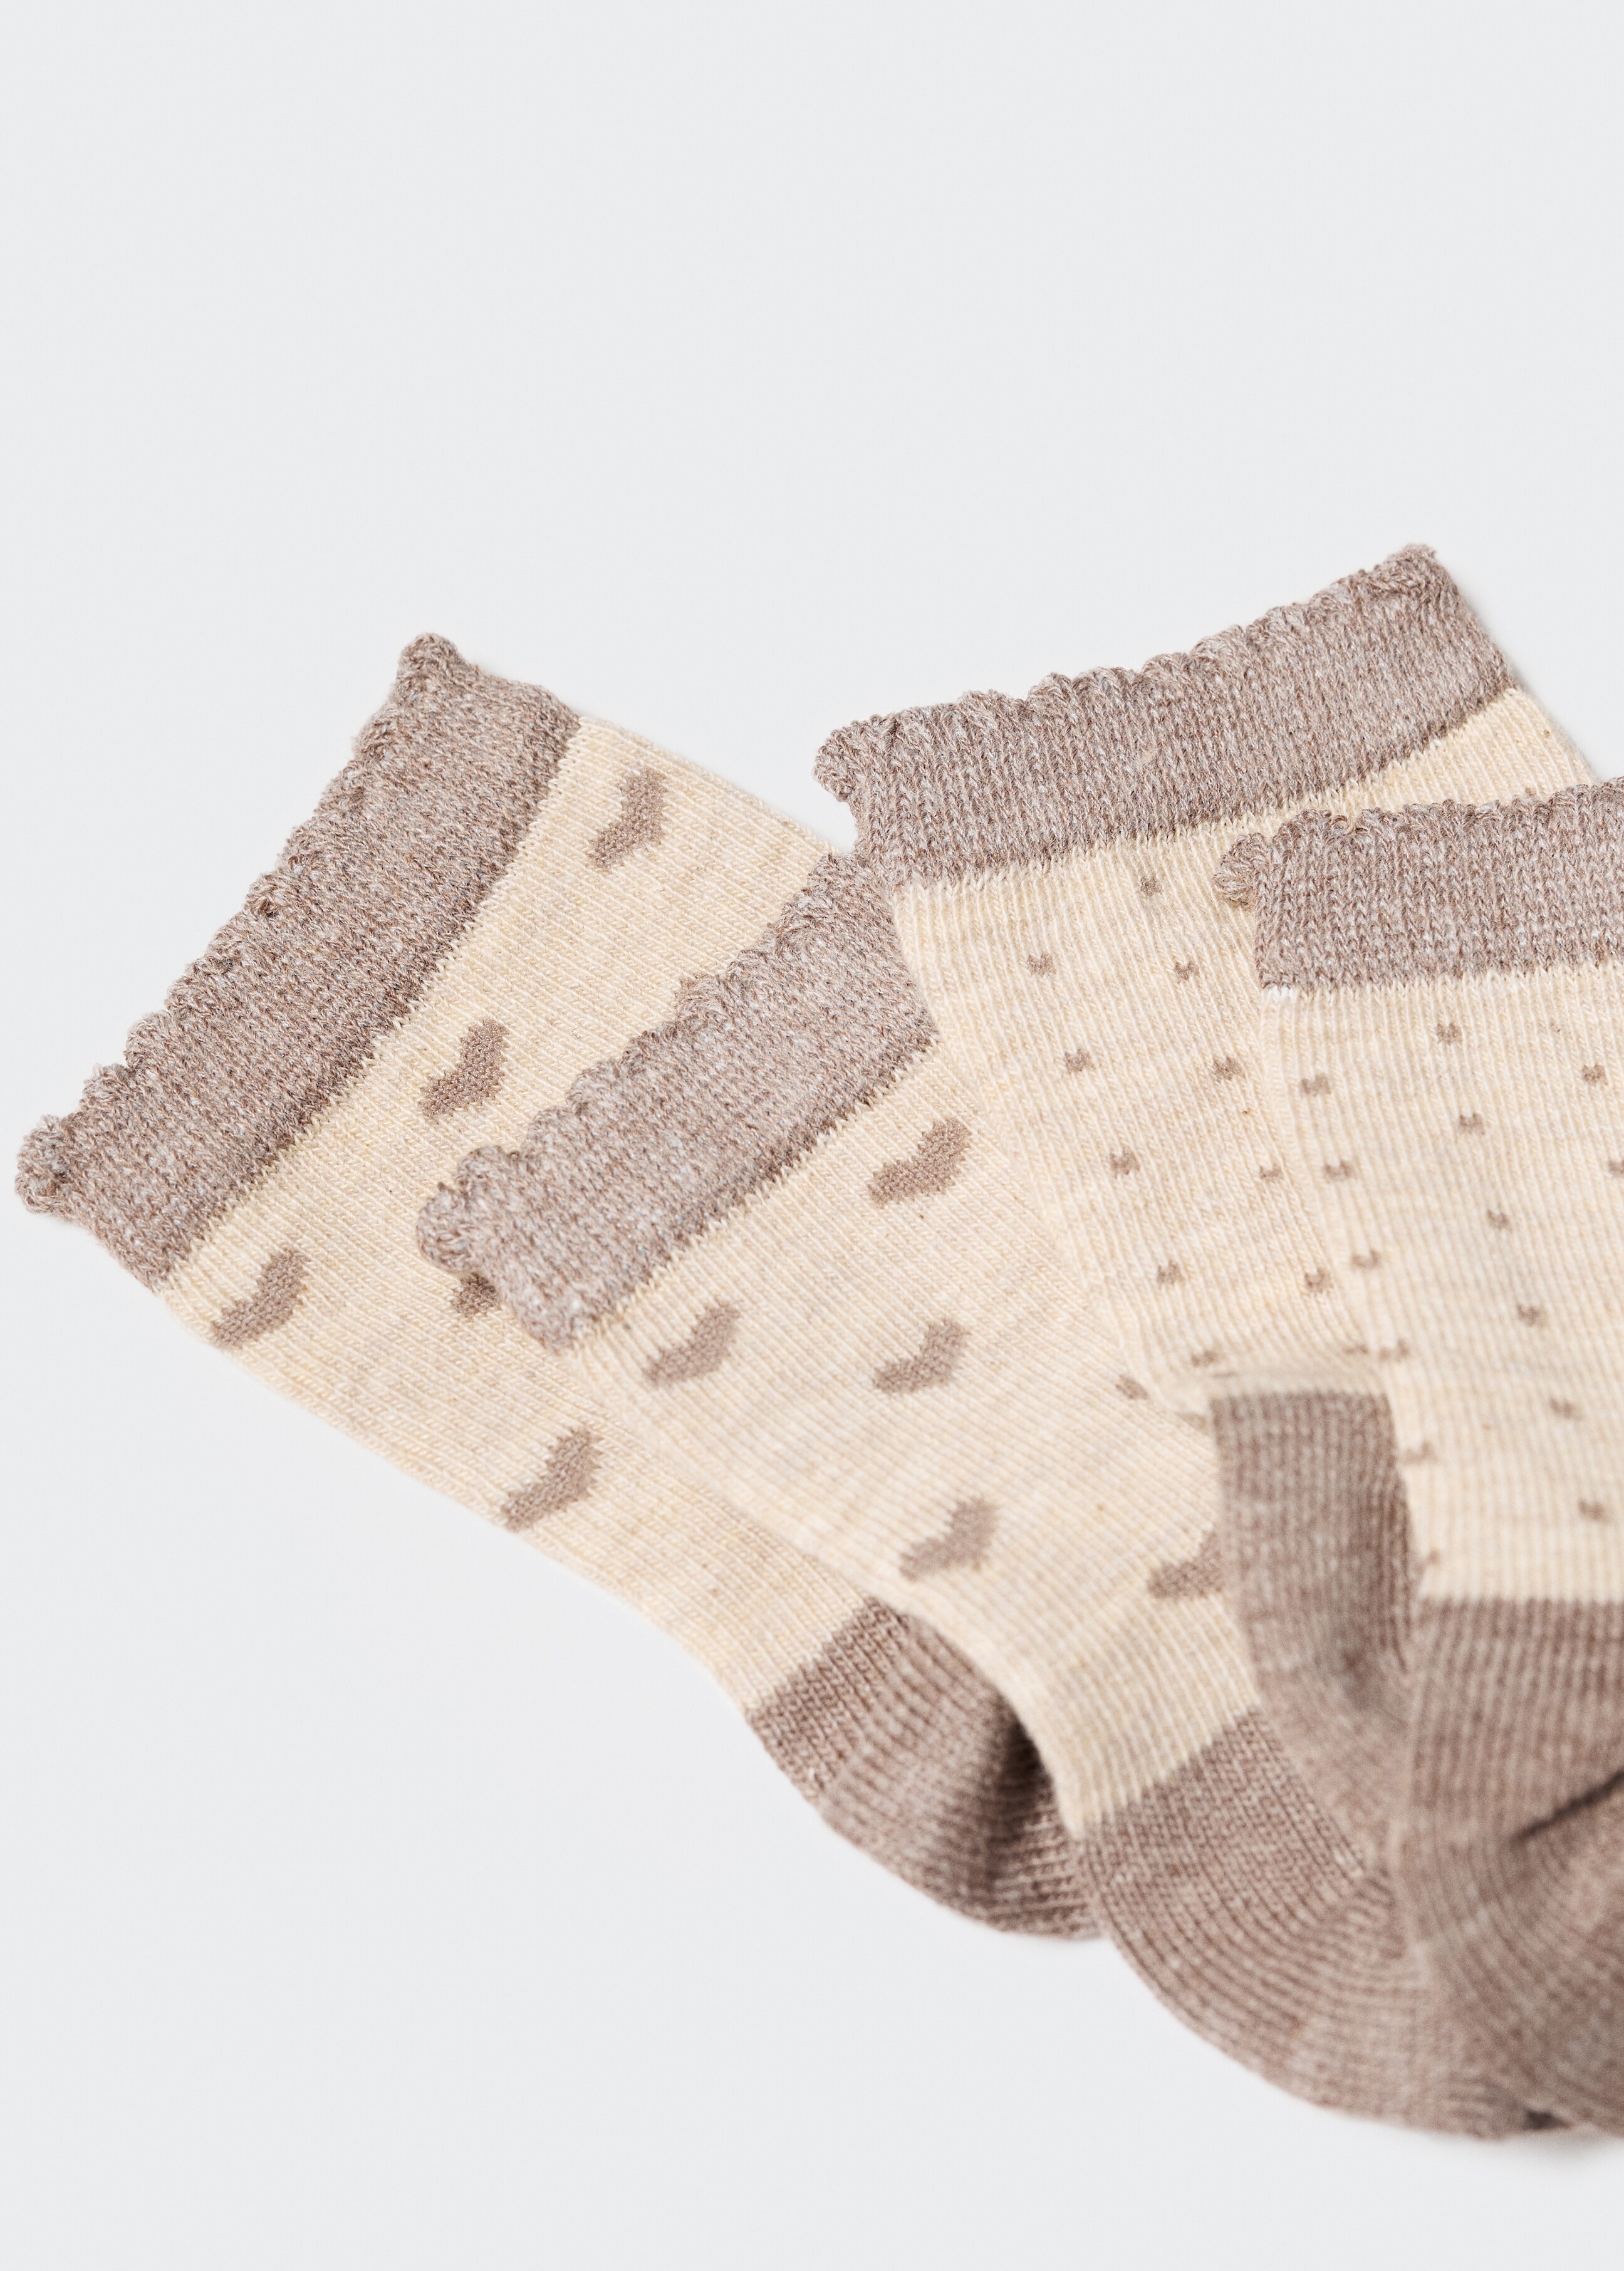 Printed cotton socks - Details of the article 8